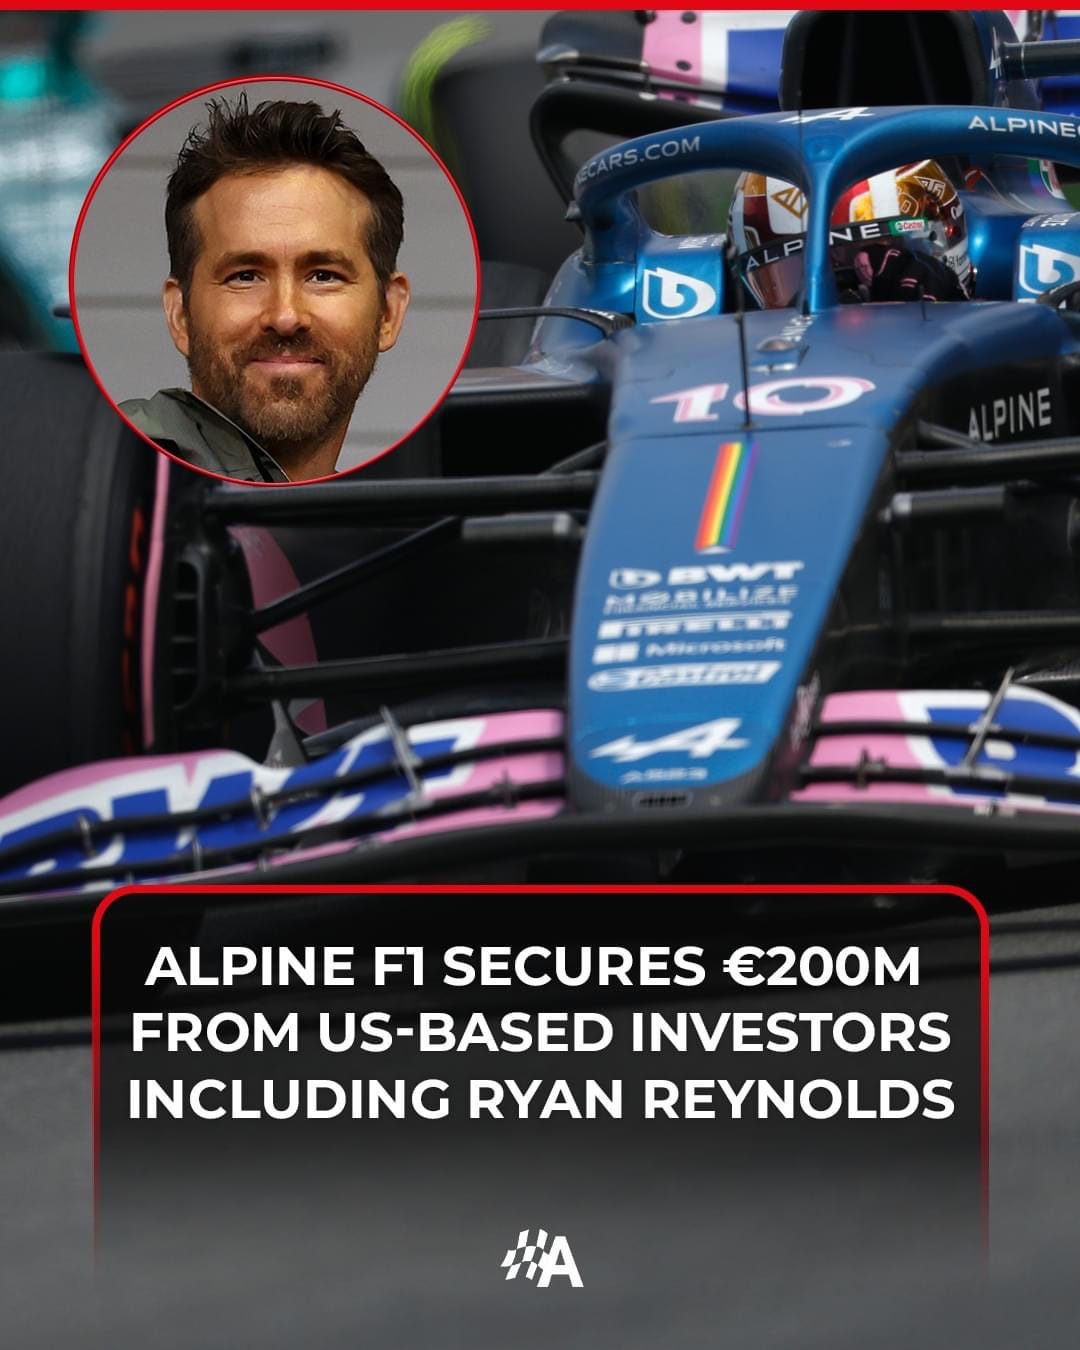 Ryan Reynolds Just Bought A Stake In The Alpine F1 Team